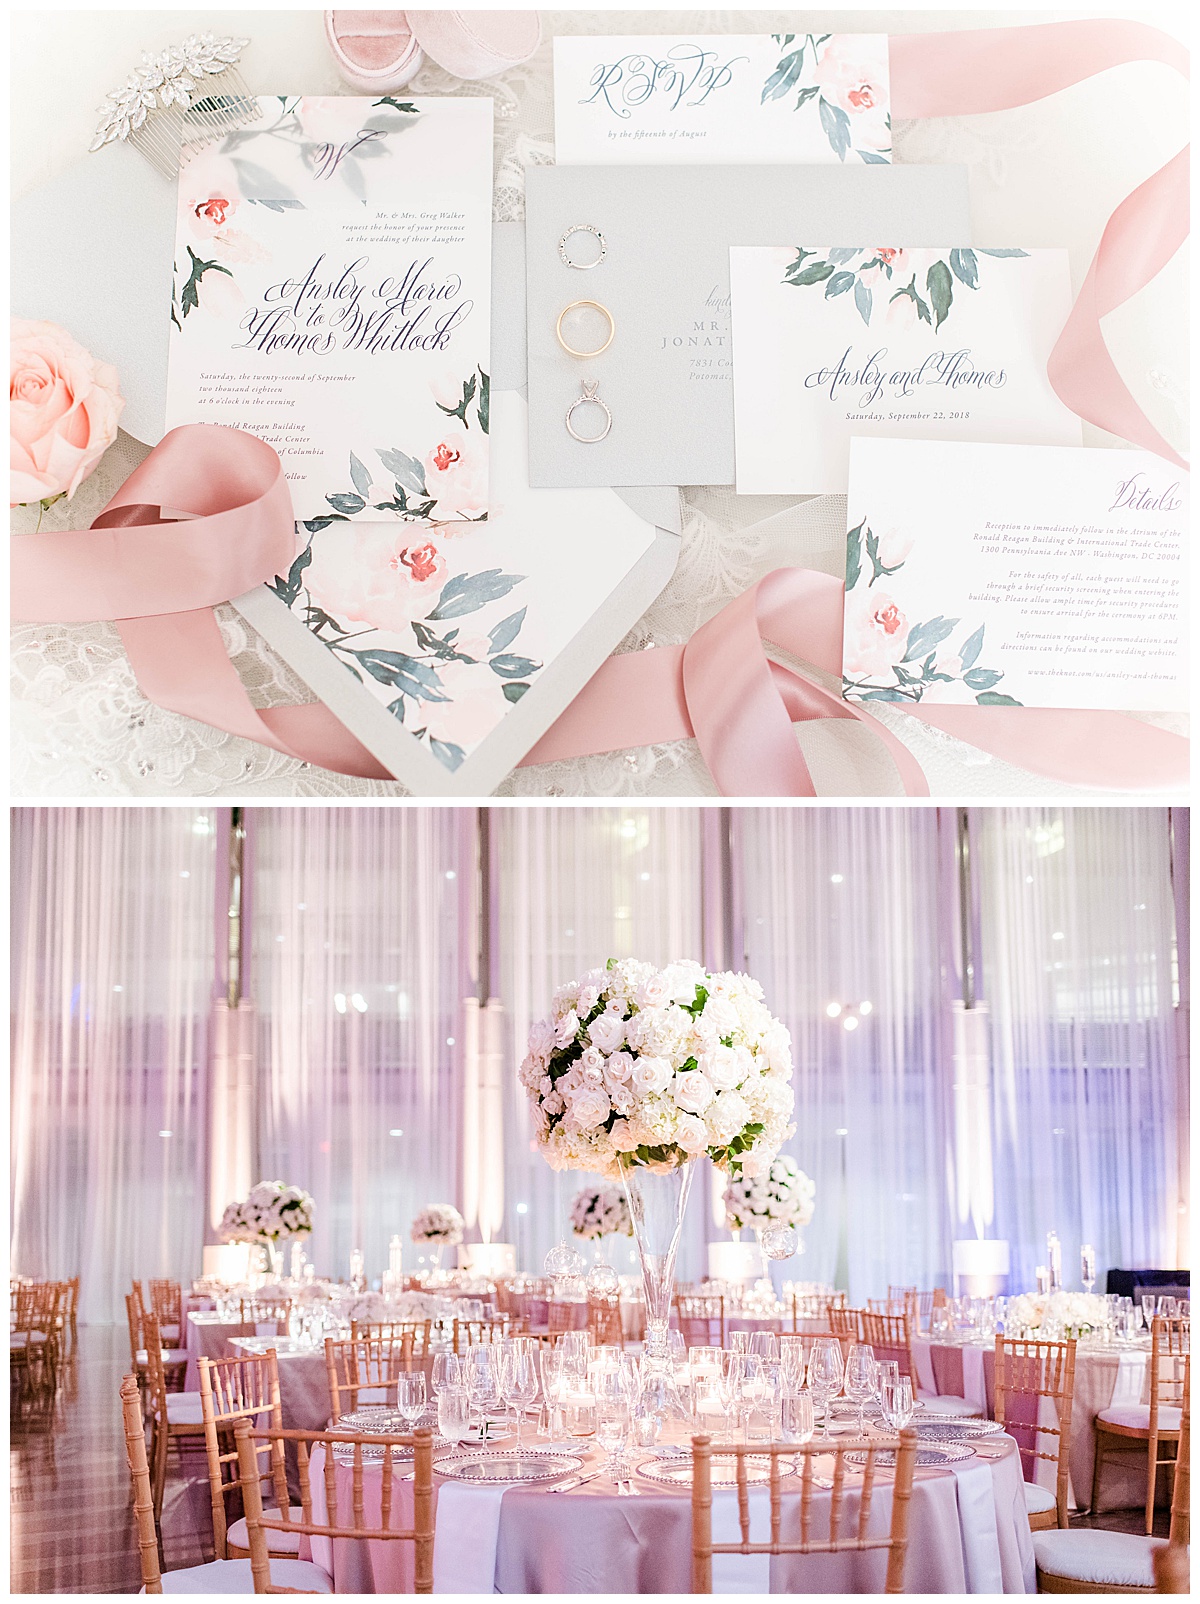 Ronald Reagan Building Wedding: Downtown DC, glamorous, invitations, florals, table styling, sparkly centerpieces, wedding reception